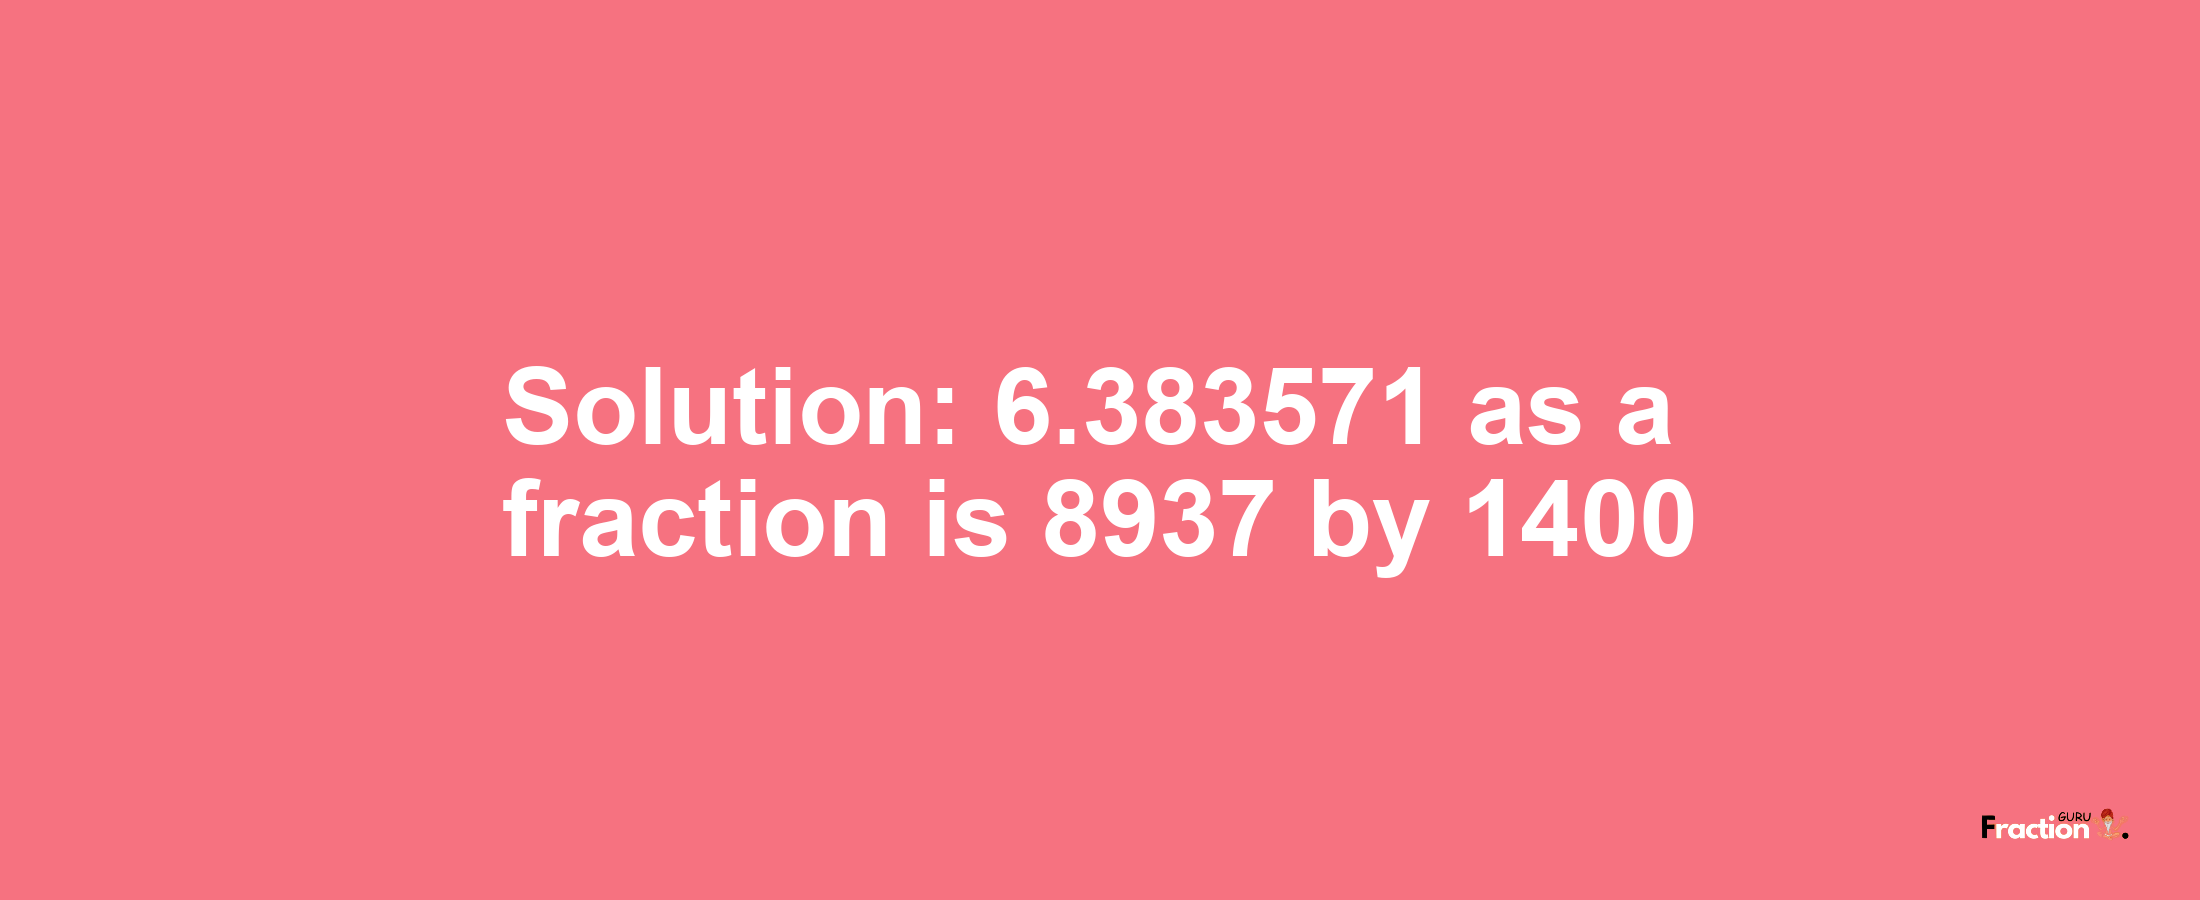 Solution:6.383571 as a fraction is 8937/1400